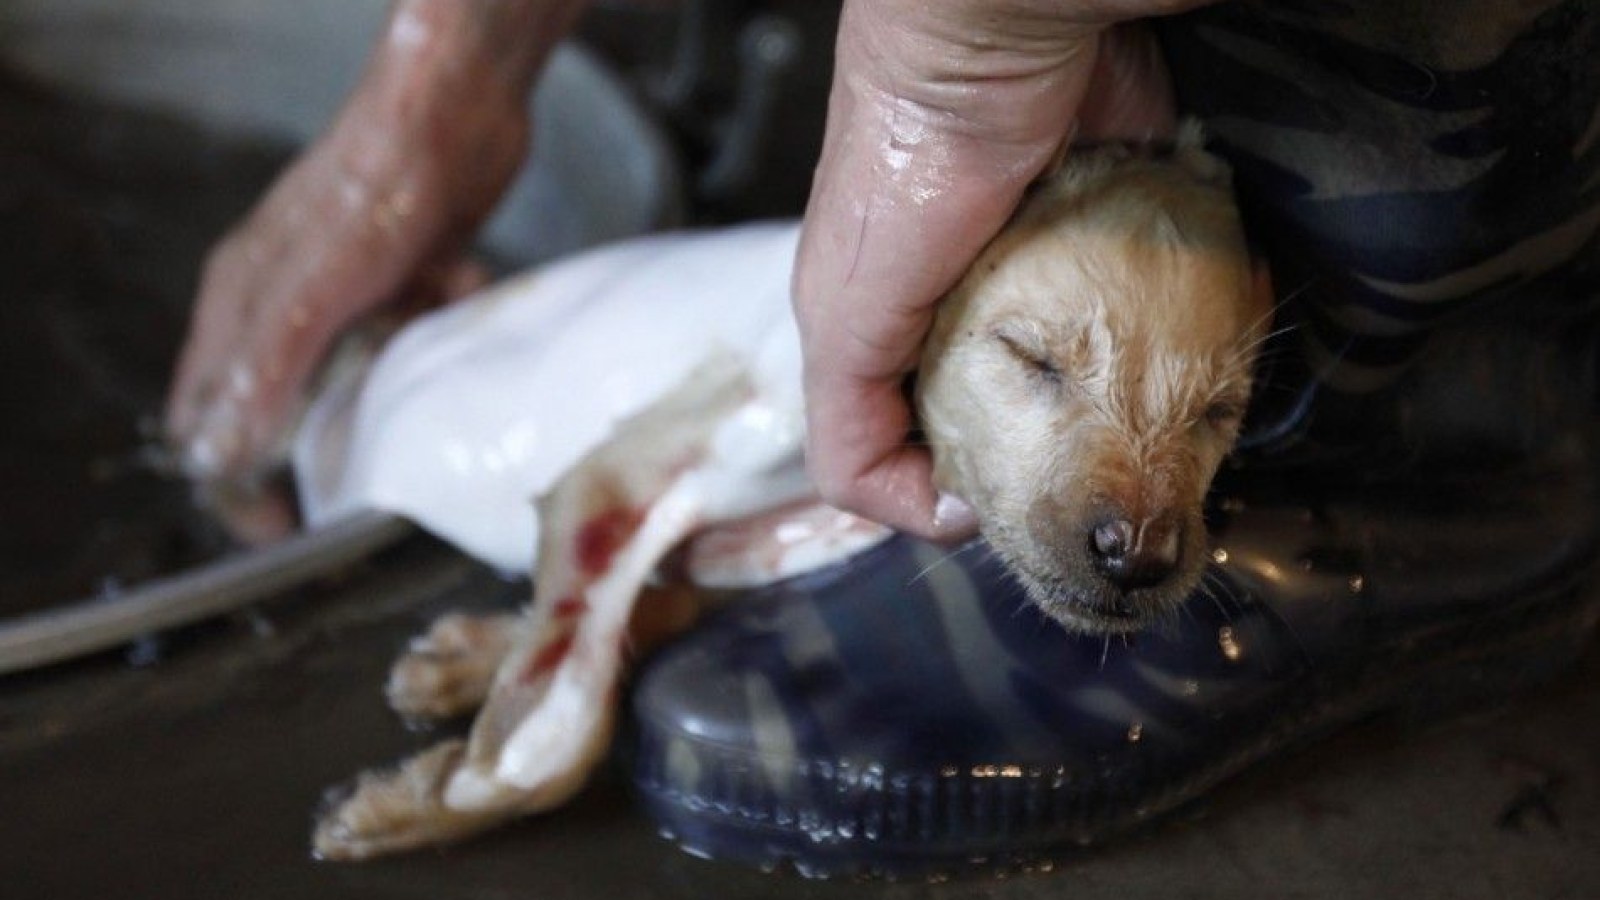 China proposes ban on dog meat, will South Korea follow suit?